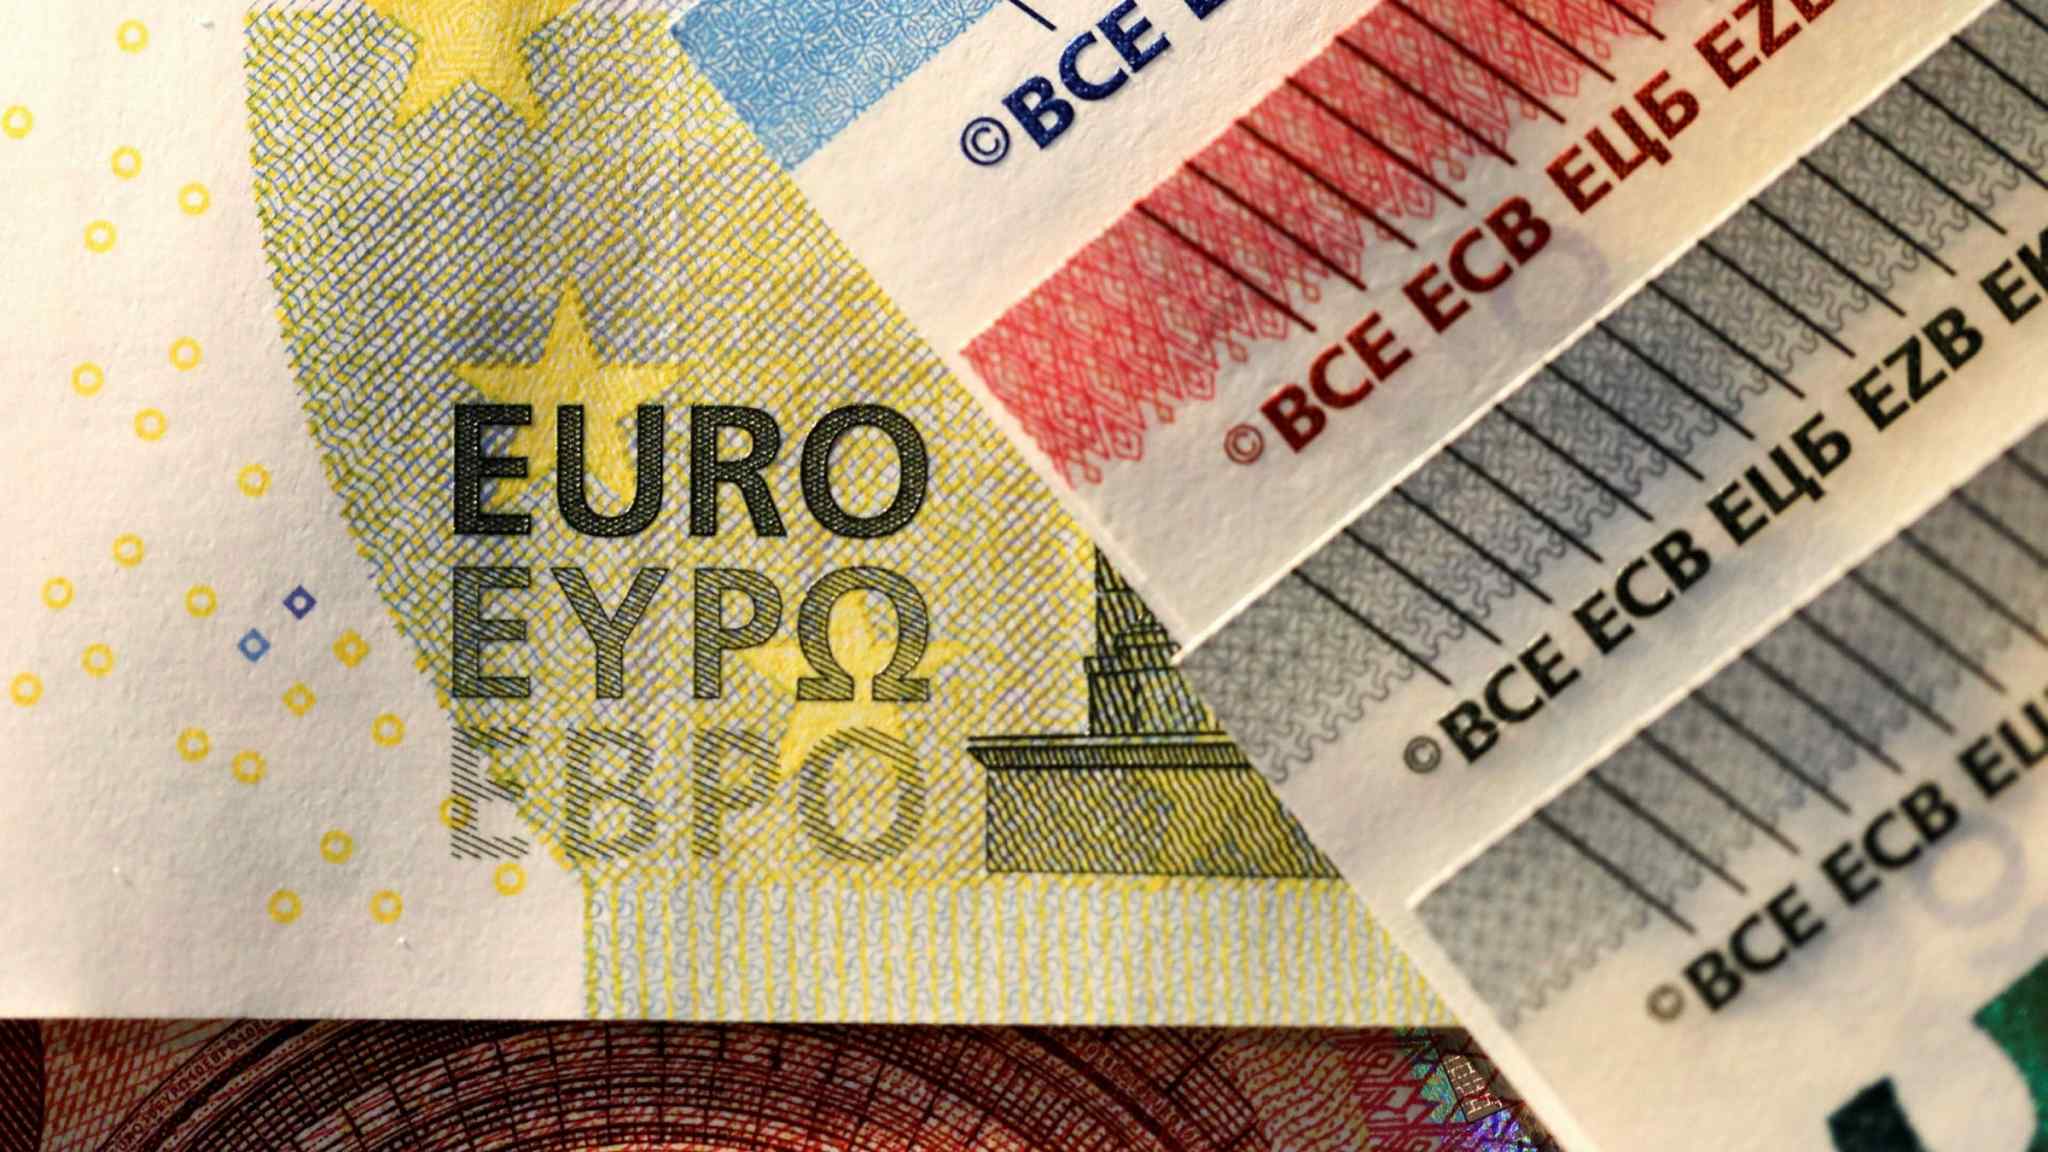 Live news updates: Risk of recession sends euro to 20-year low against dollar